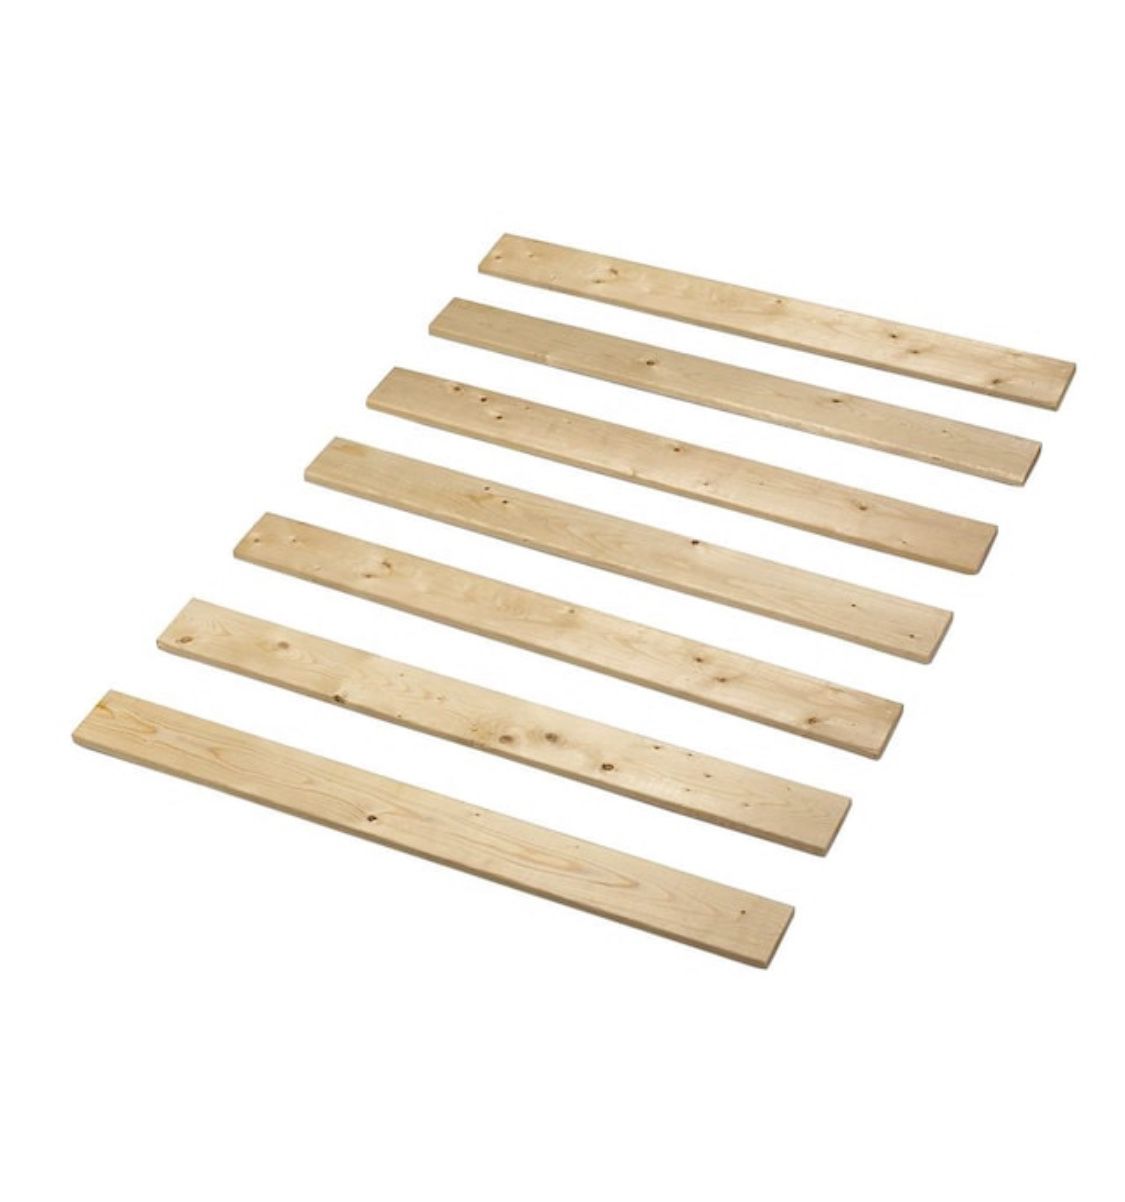 *BUNKIE BOARD REPLACEMENT*   (2x)  Todd Collection 13-pc Bunk Board Slats - B27-SL(MTL) - 26 Pieces Total - 39”x2.75”x0.75” - Open Box, never used